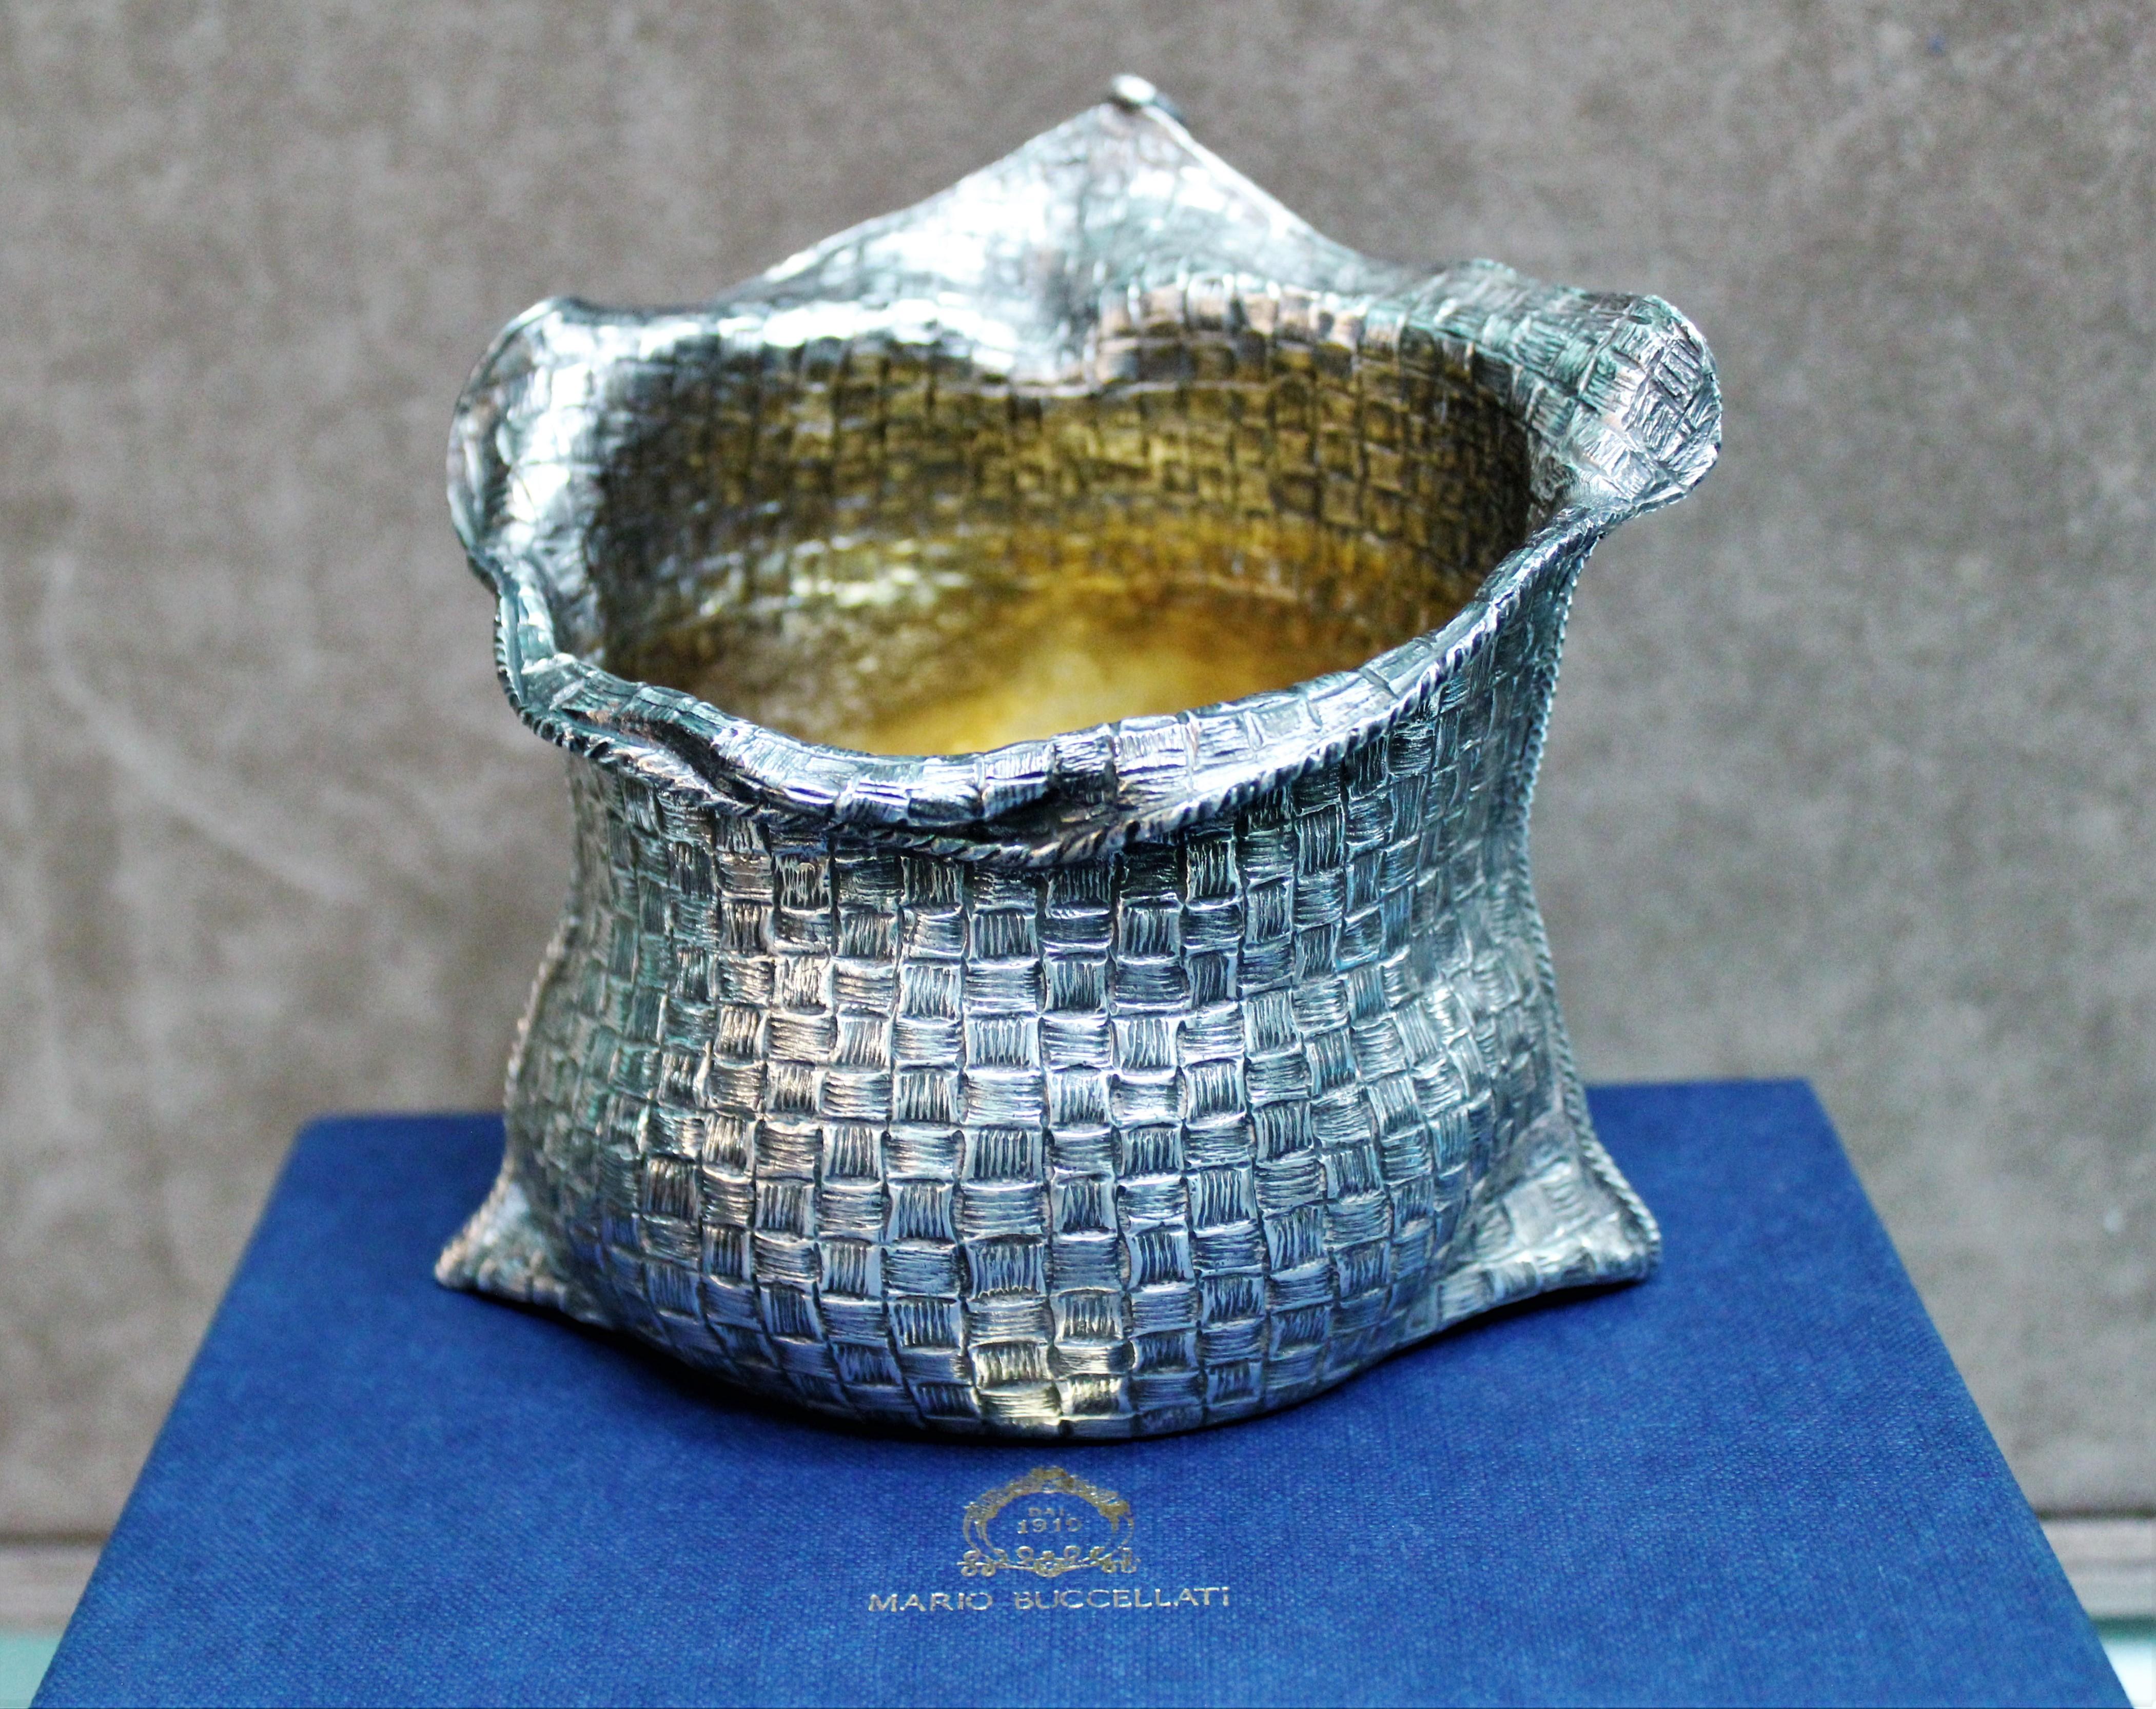 Wonderful sterling silver Mario Buccellati centerpiece with vermeil inside.

Mario Buccellati is the most important italian silversmith and brand of all times.

Entirely engraved and embossed by hand by Ilario Pradella for Mario Buccellati in